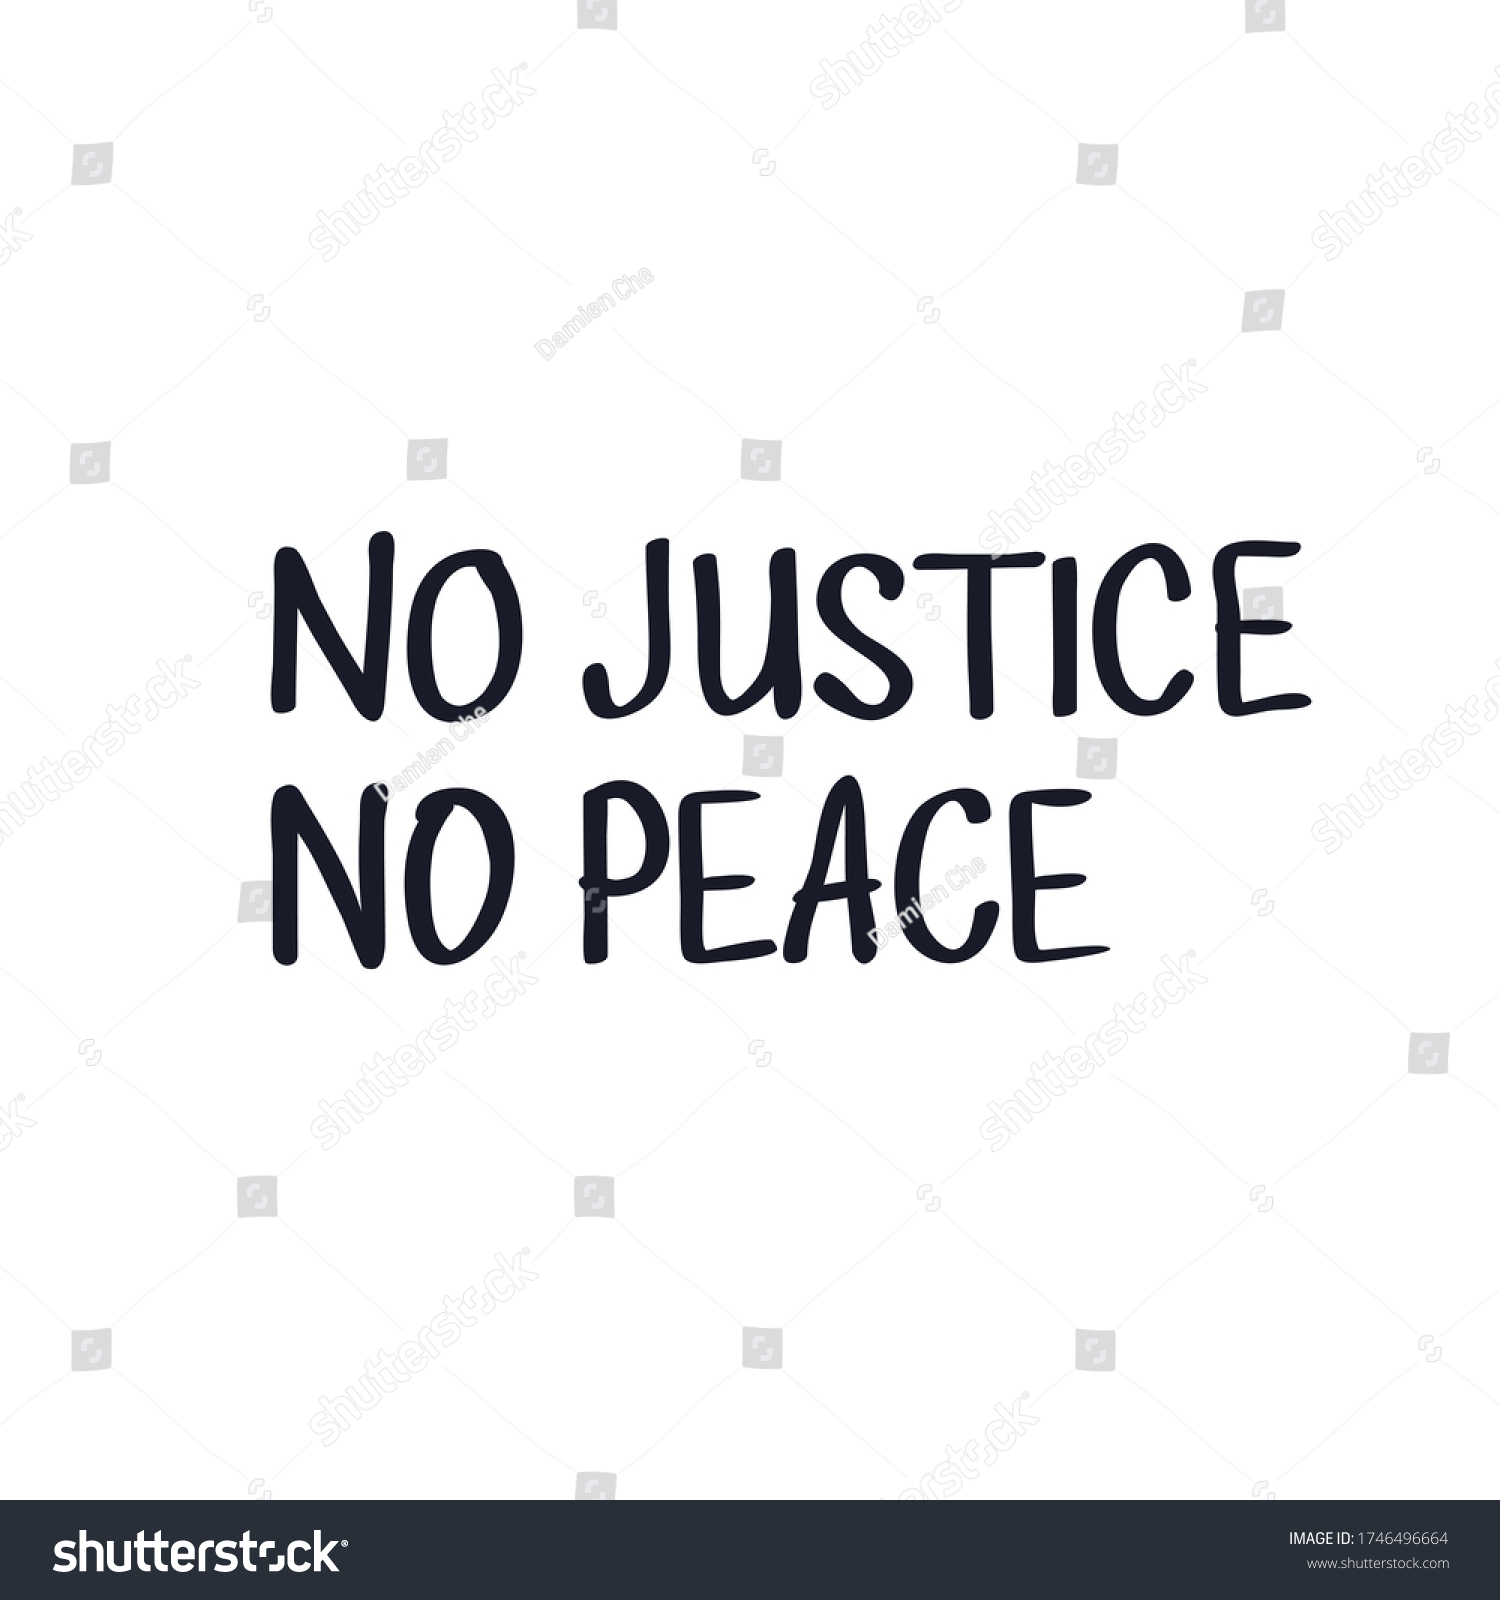 No Justice No Peace Poster Background Stock Vector Royalty Free 1746496664 Shutterstock